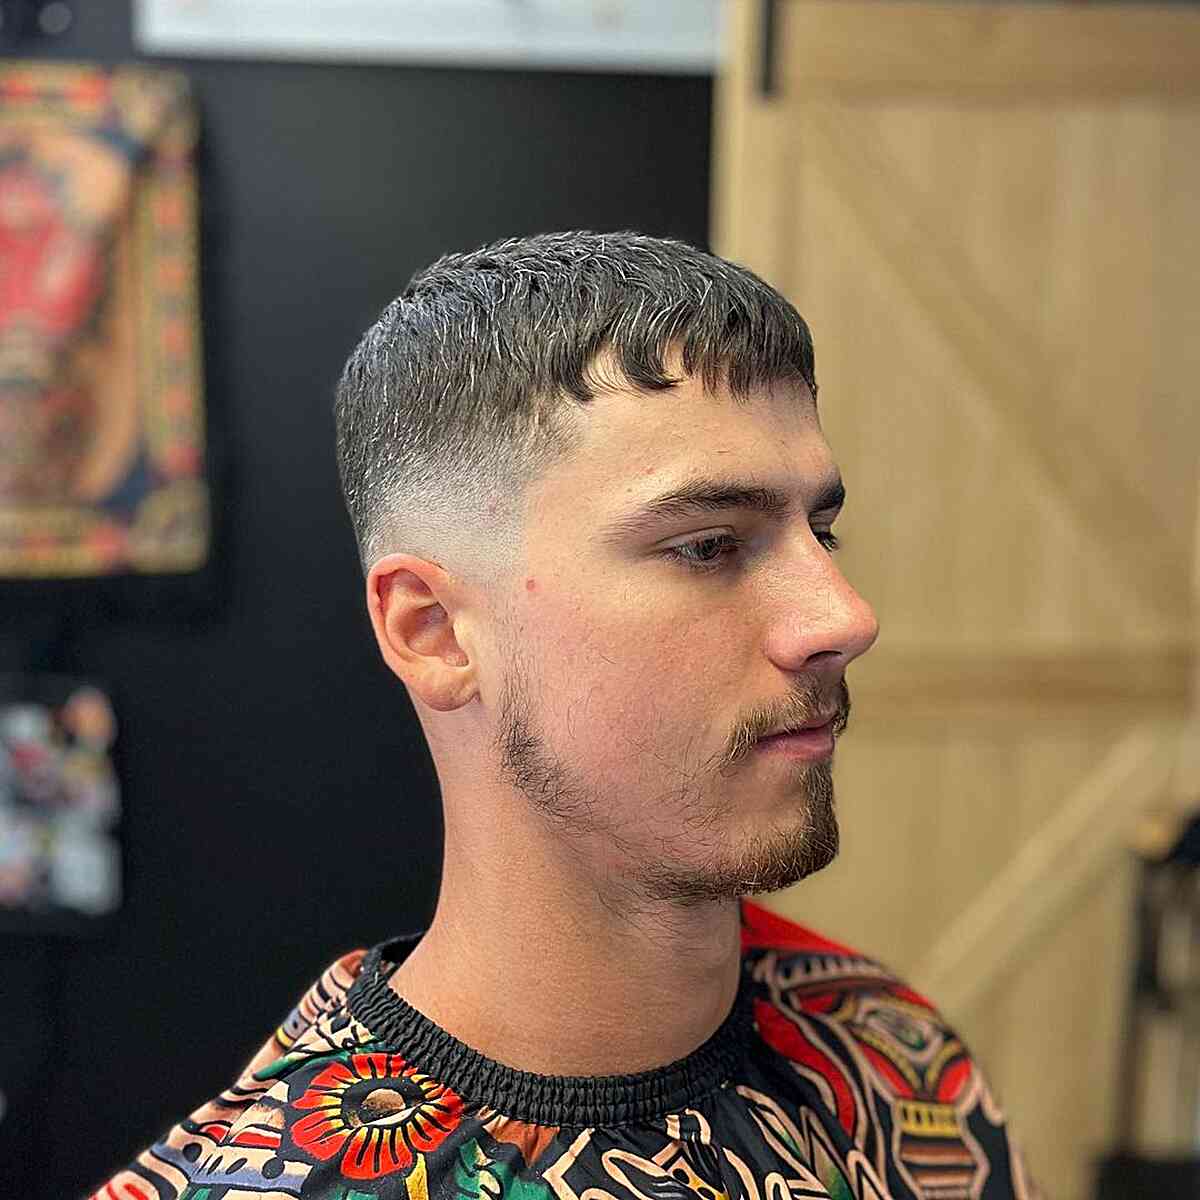 Short Faded Crop Cut with Short Wavy Bangs for Men